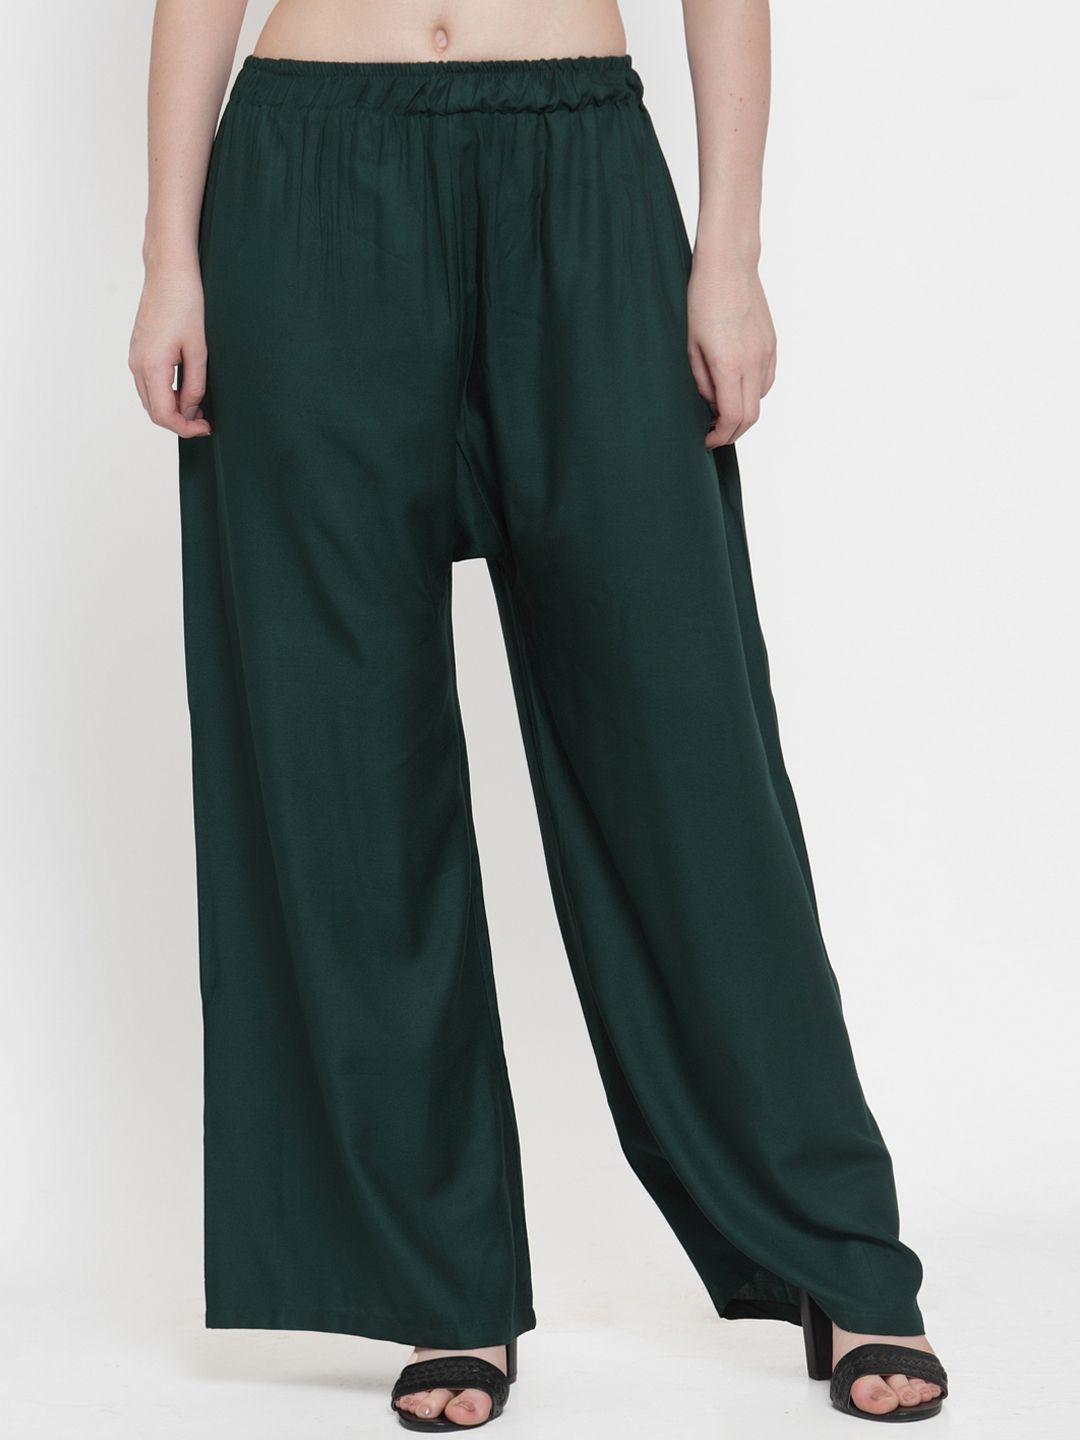 tag 7 women green solid flared palazzos